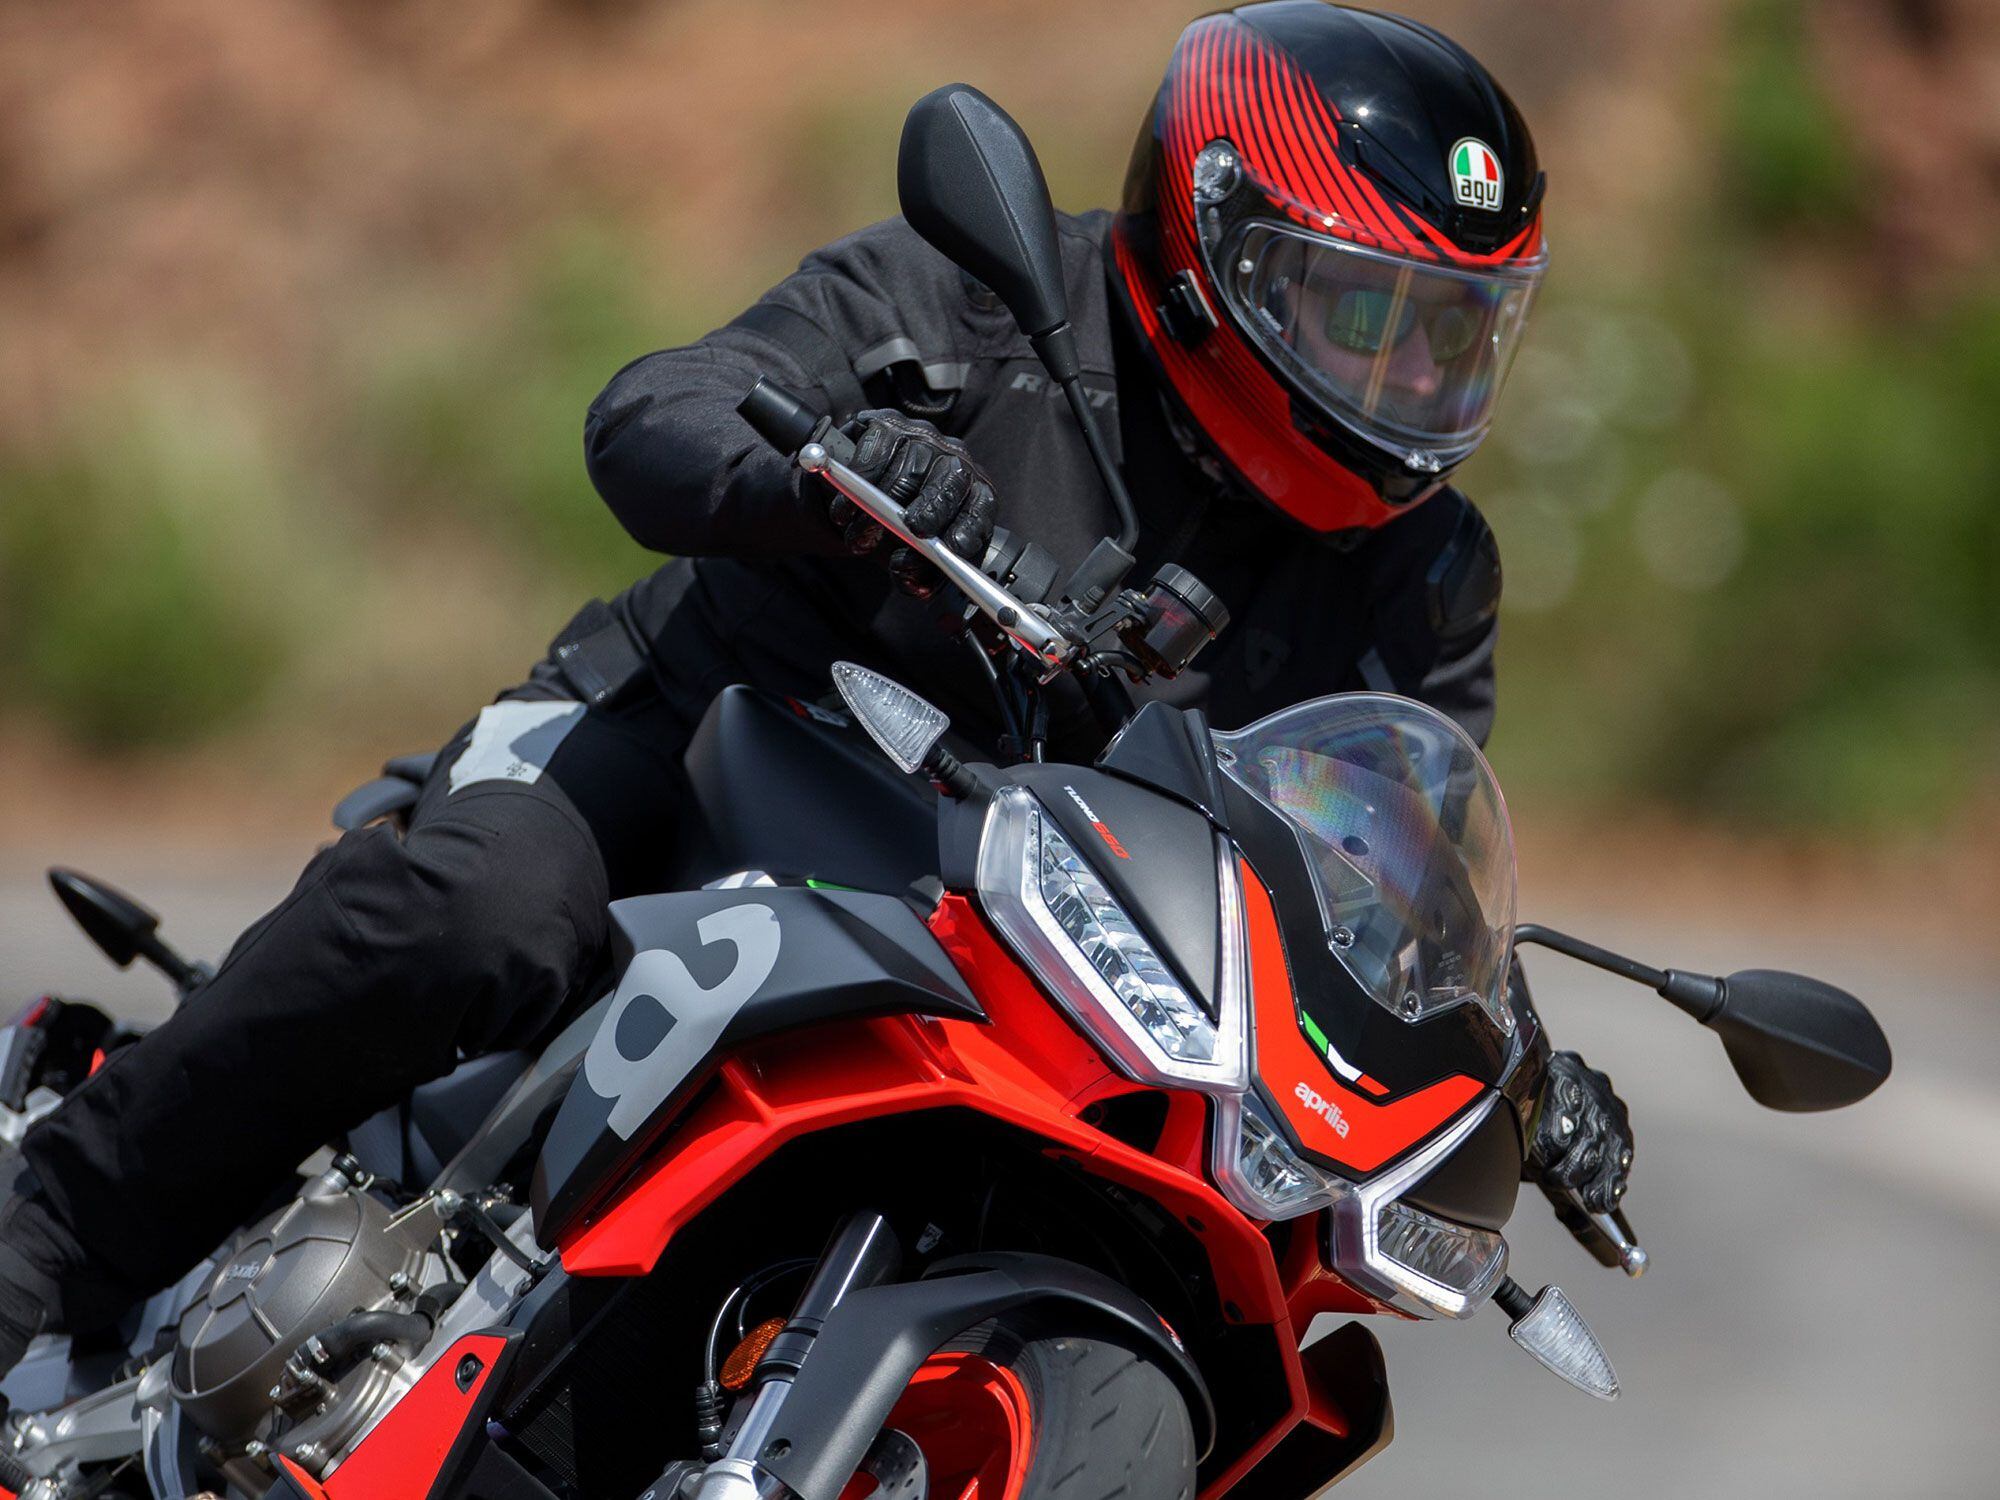 Aprilia’s new 2021 Tuono 660 is set to hit North American dealers sometime this spring.